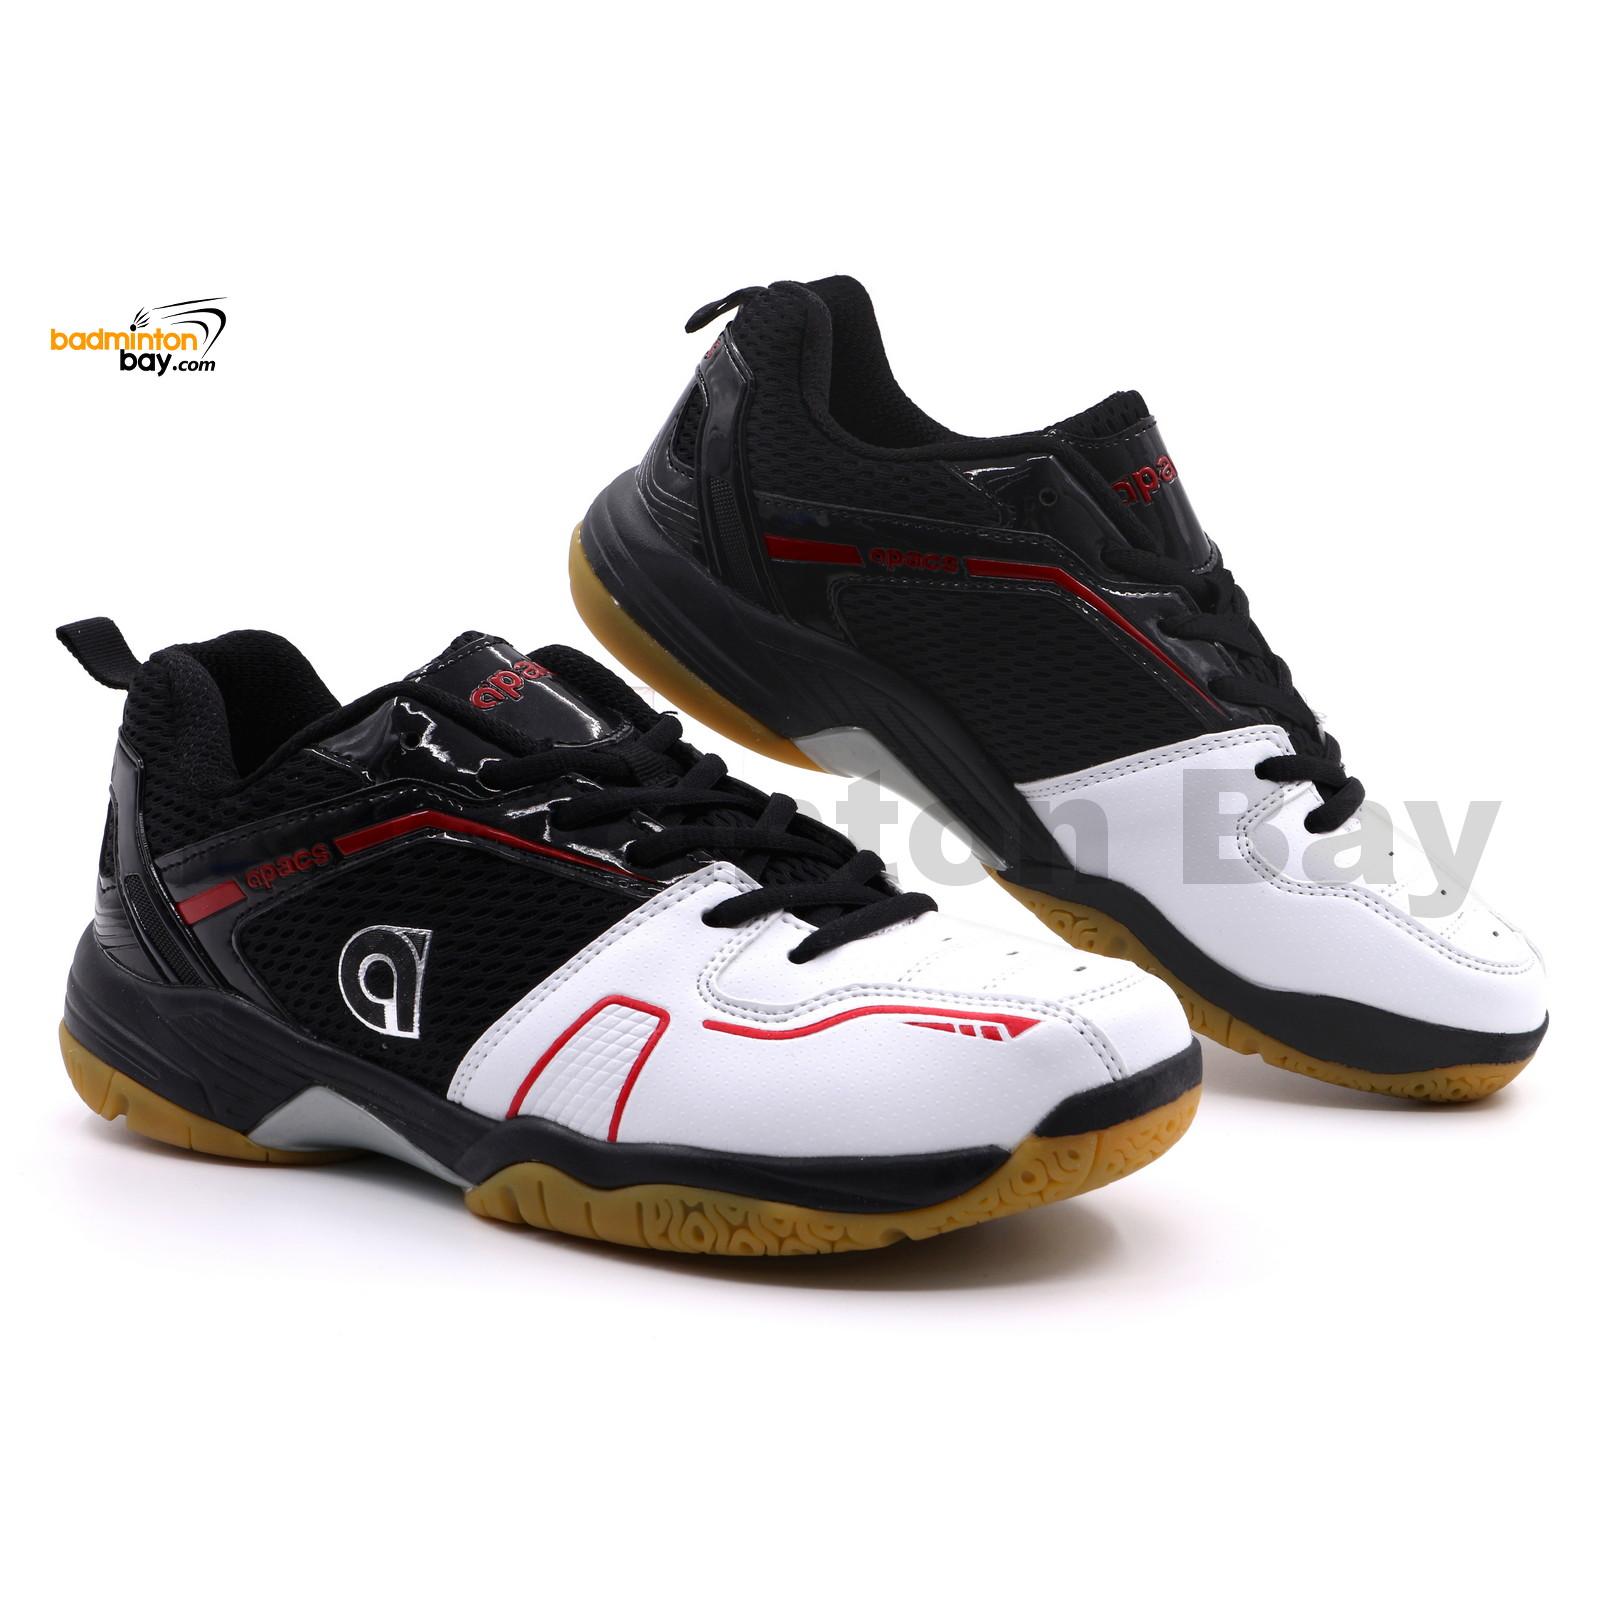 Apacs Cushion Power 082 Black White Badminton Shoes With Improved ...